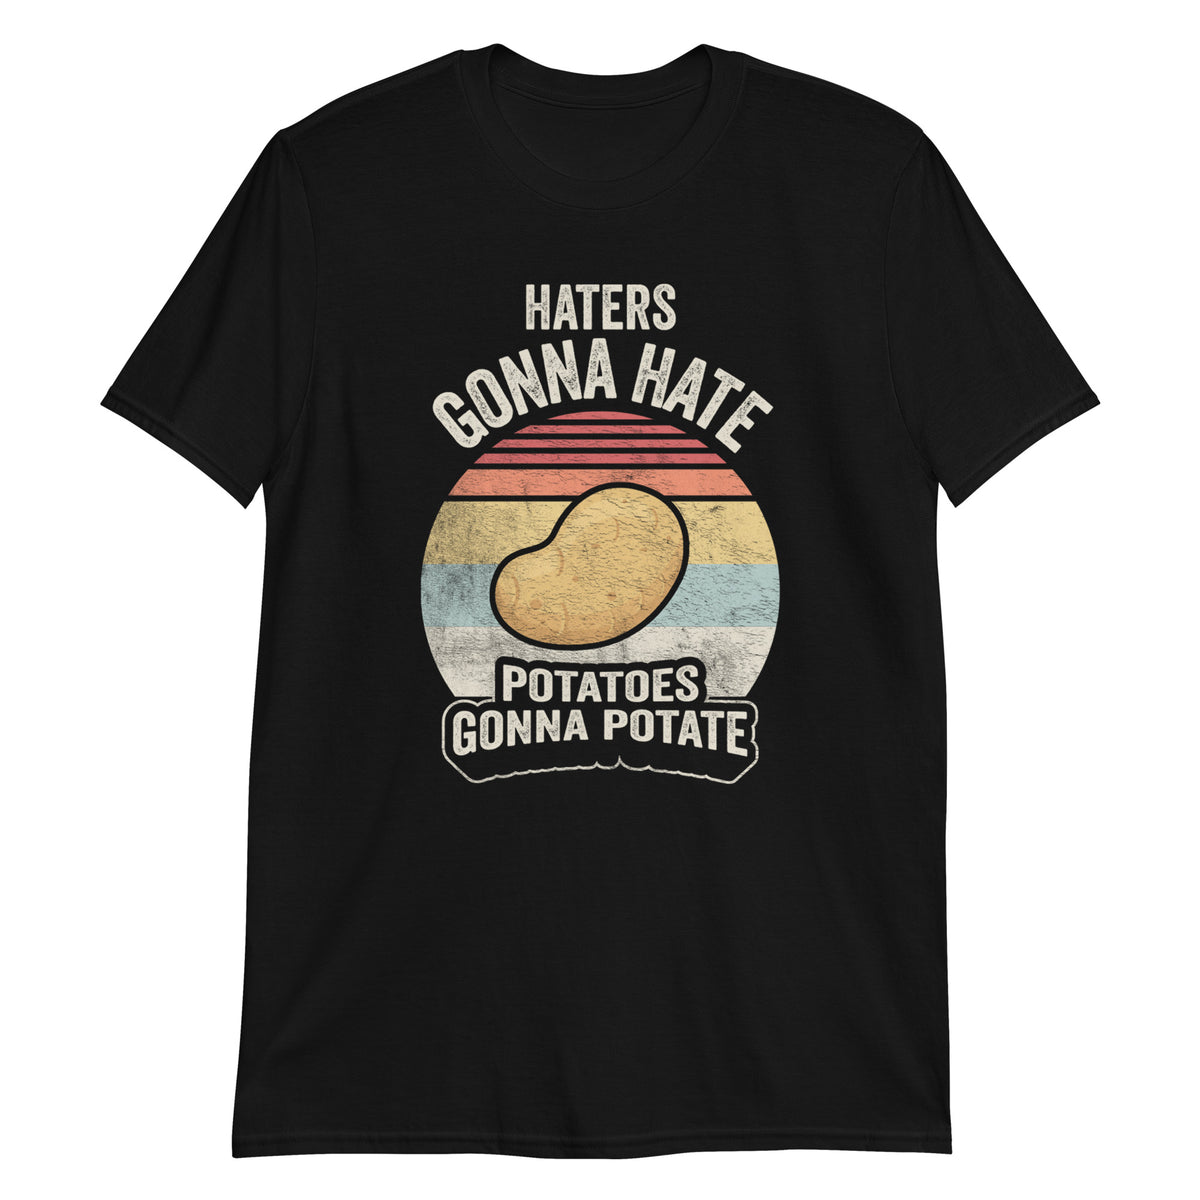 Haters Gonna Hate Potatoes T-Shirt